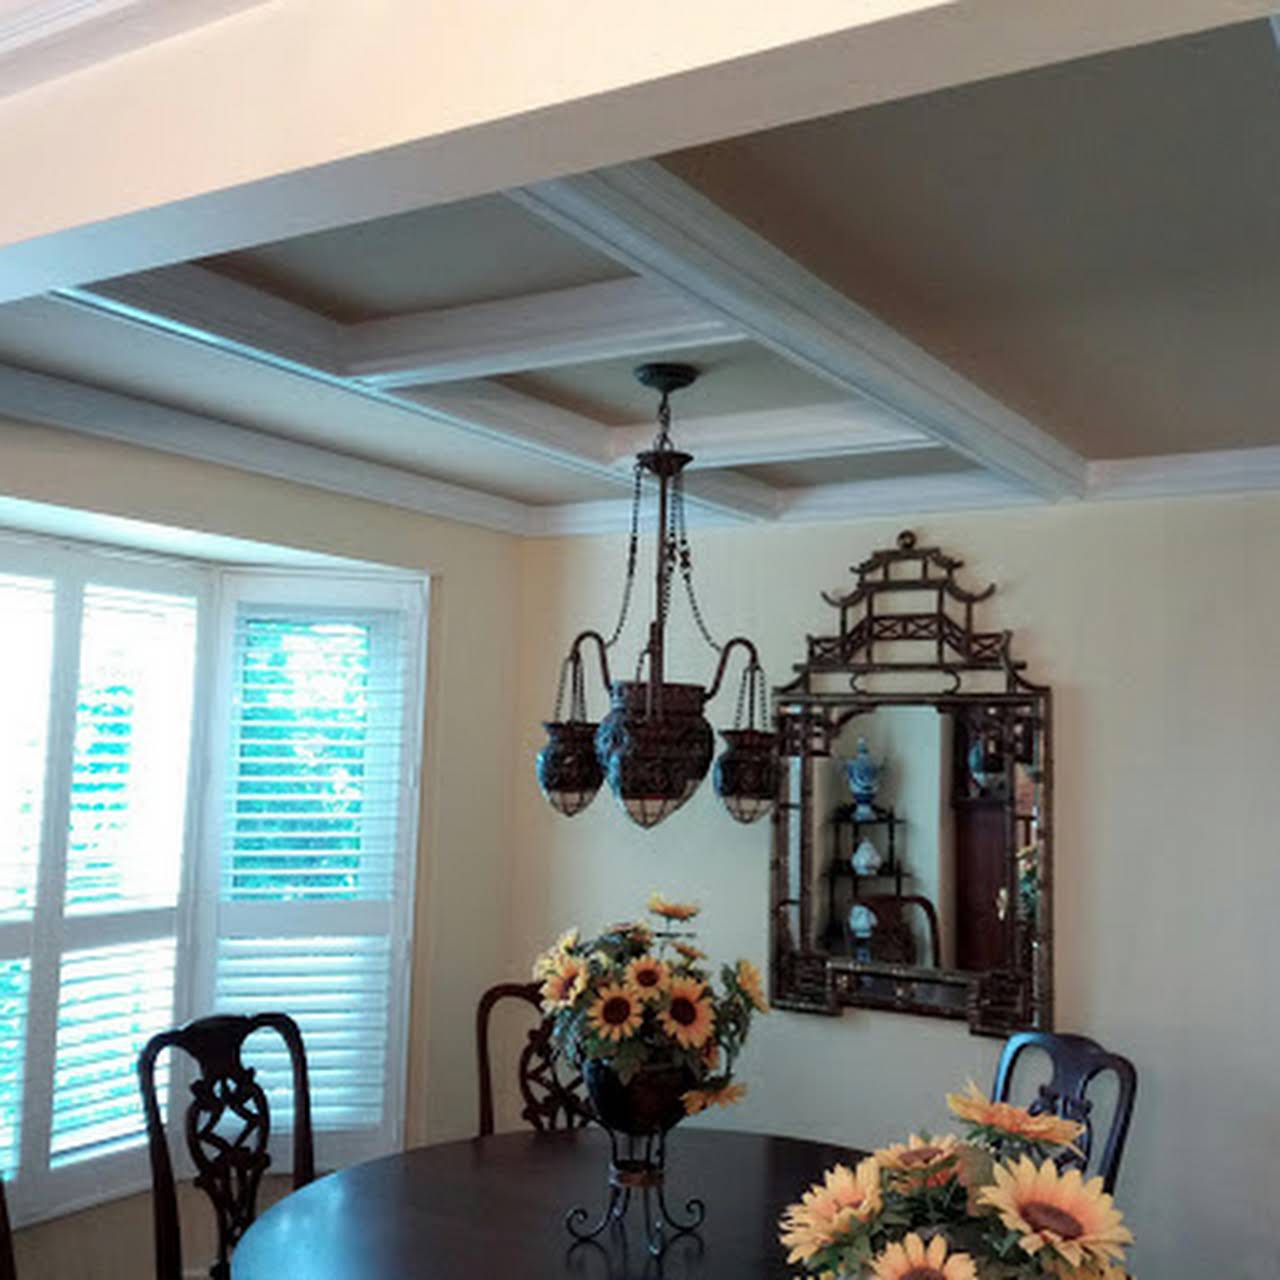 6 inches deep coffered ceiling